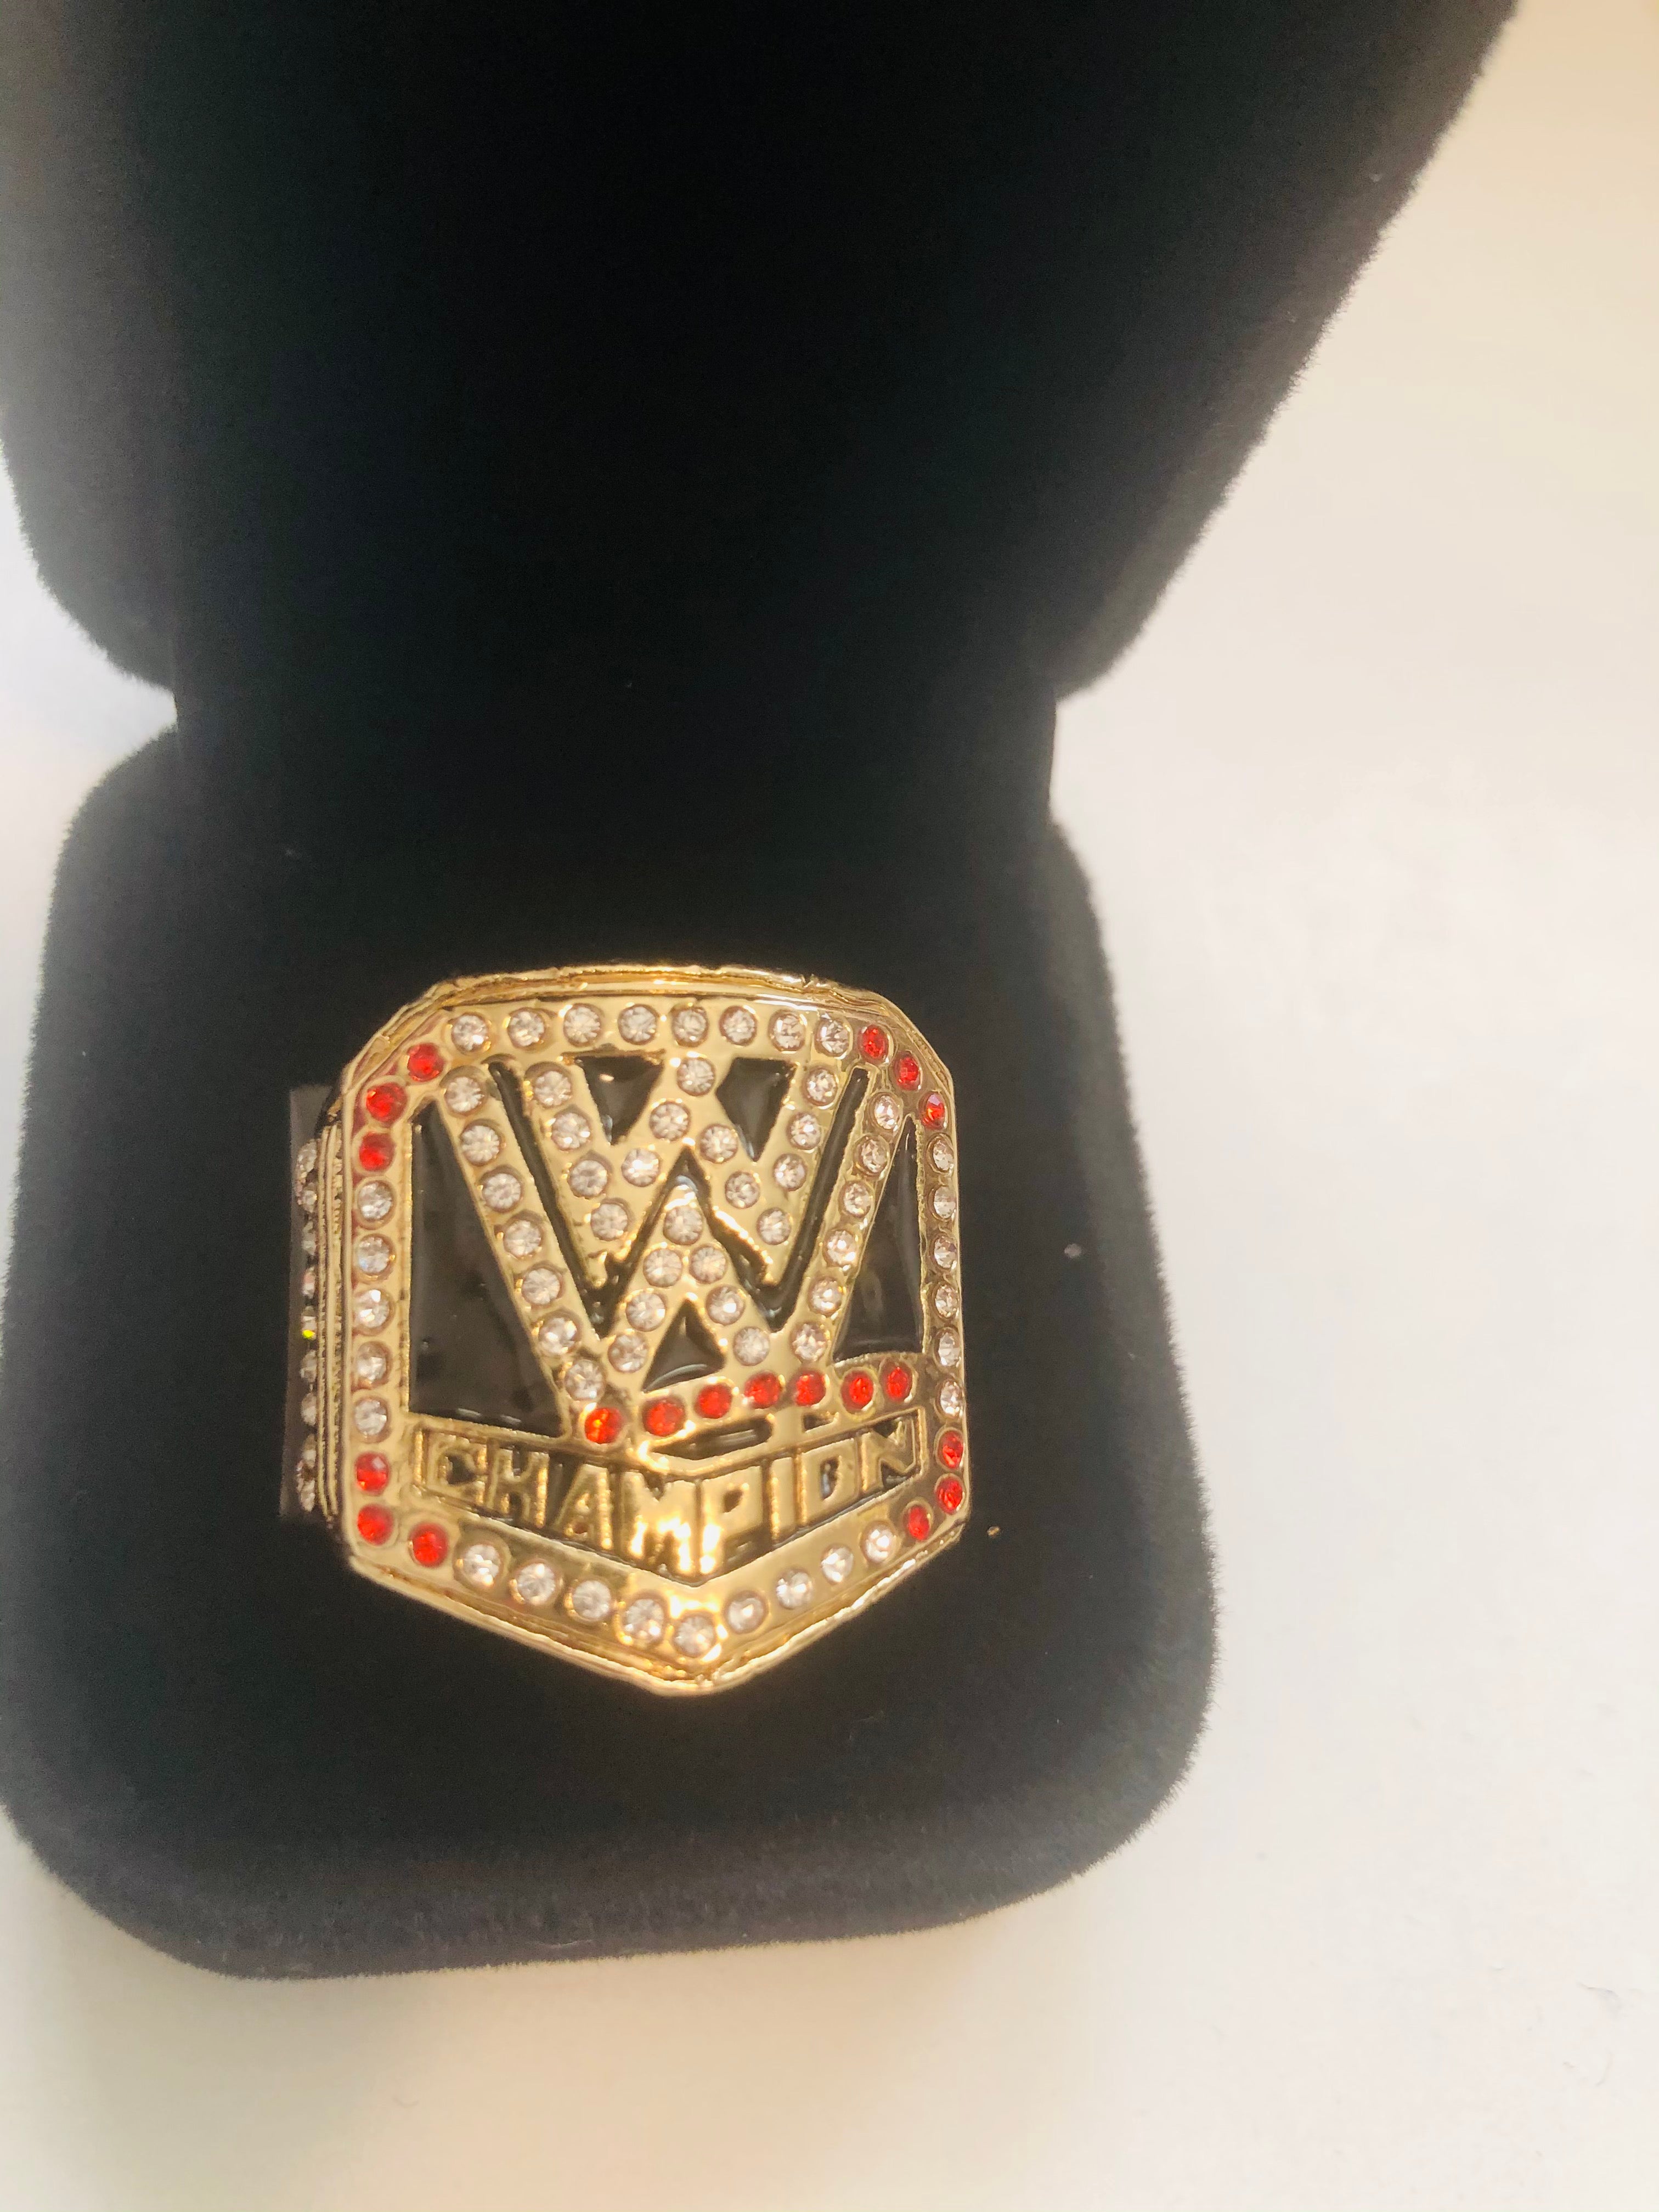 WWF wrestling replica ring with holder